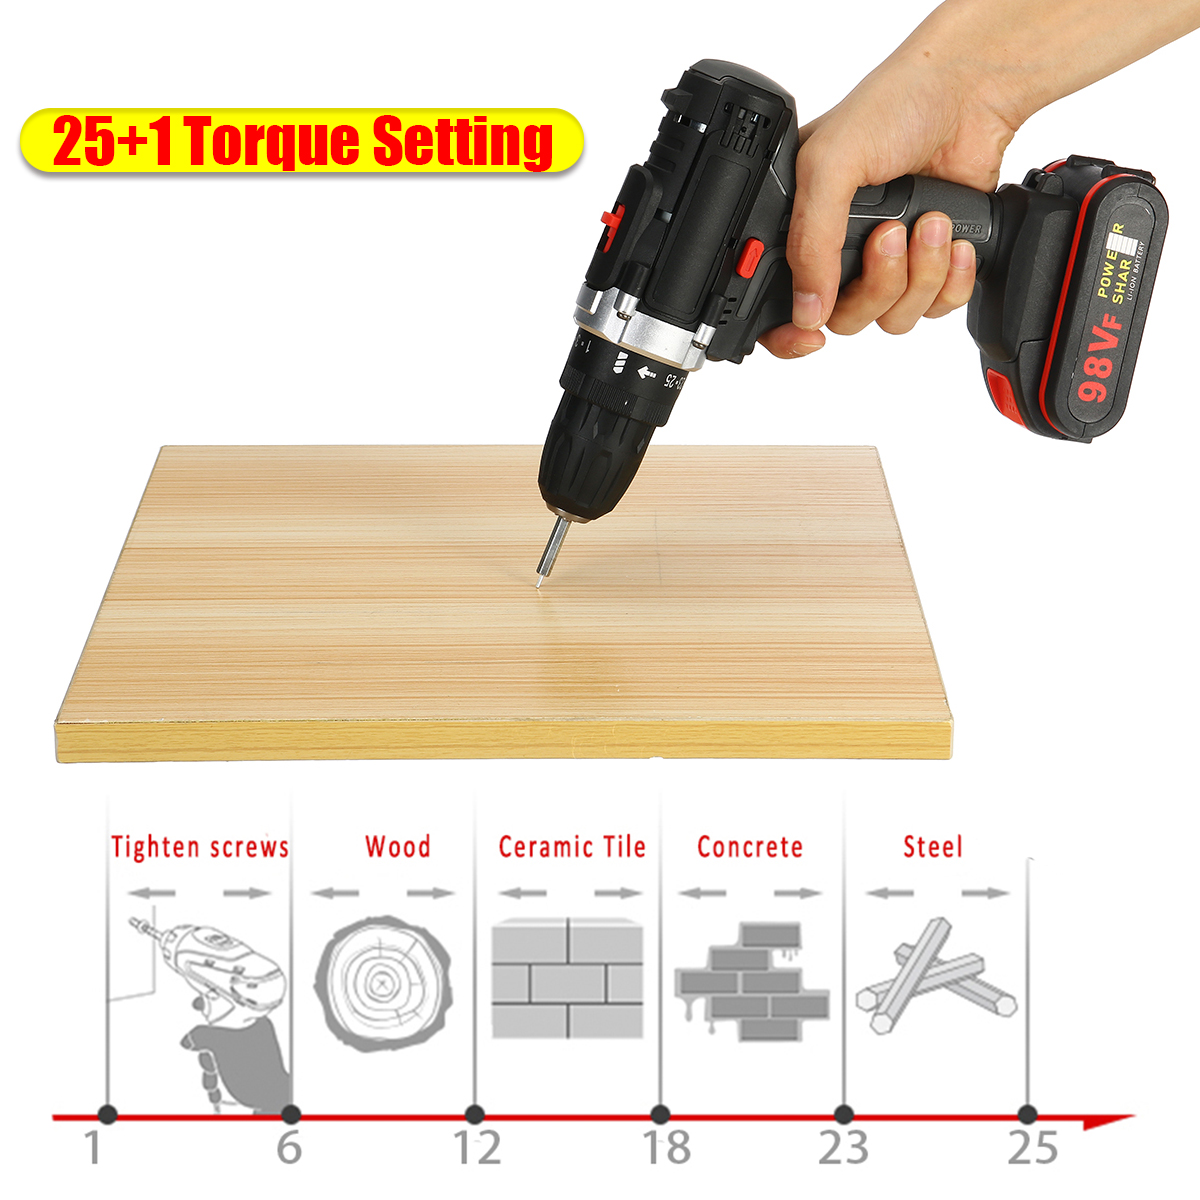 98VF-Cordless-Electric-Impact-Drill-Screwdriver-251-Torque-Rechargeable-Household-Screwdriver-1764622-5